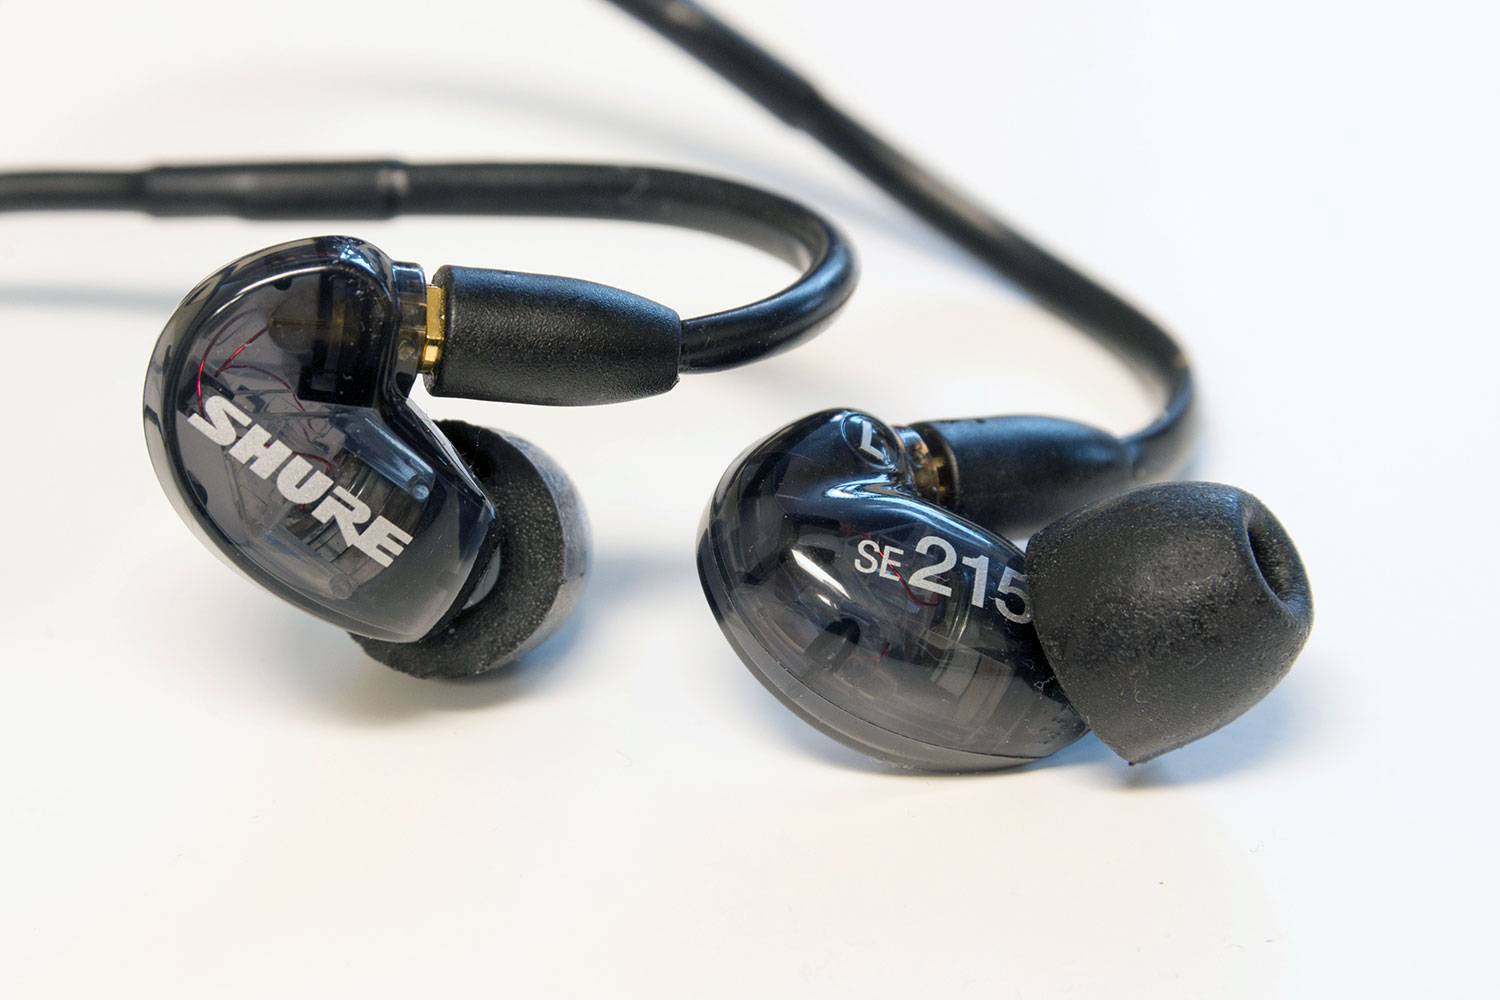 Shure SE-215 Review - The Best Budget IEM — Audiophile ON